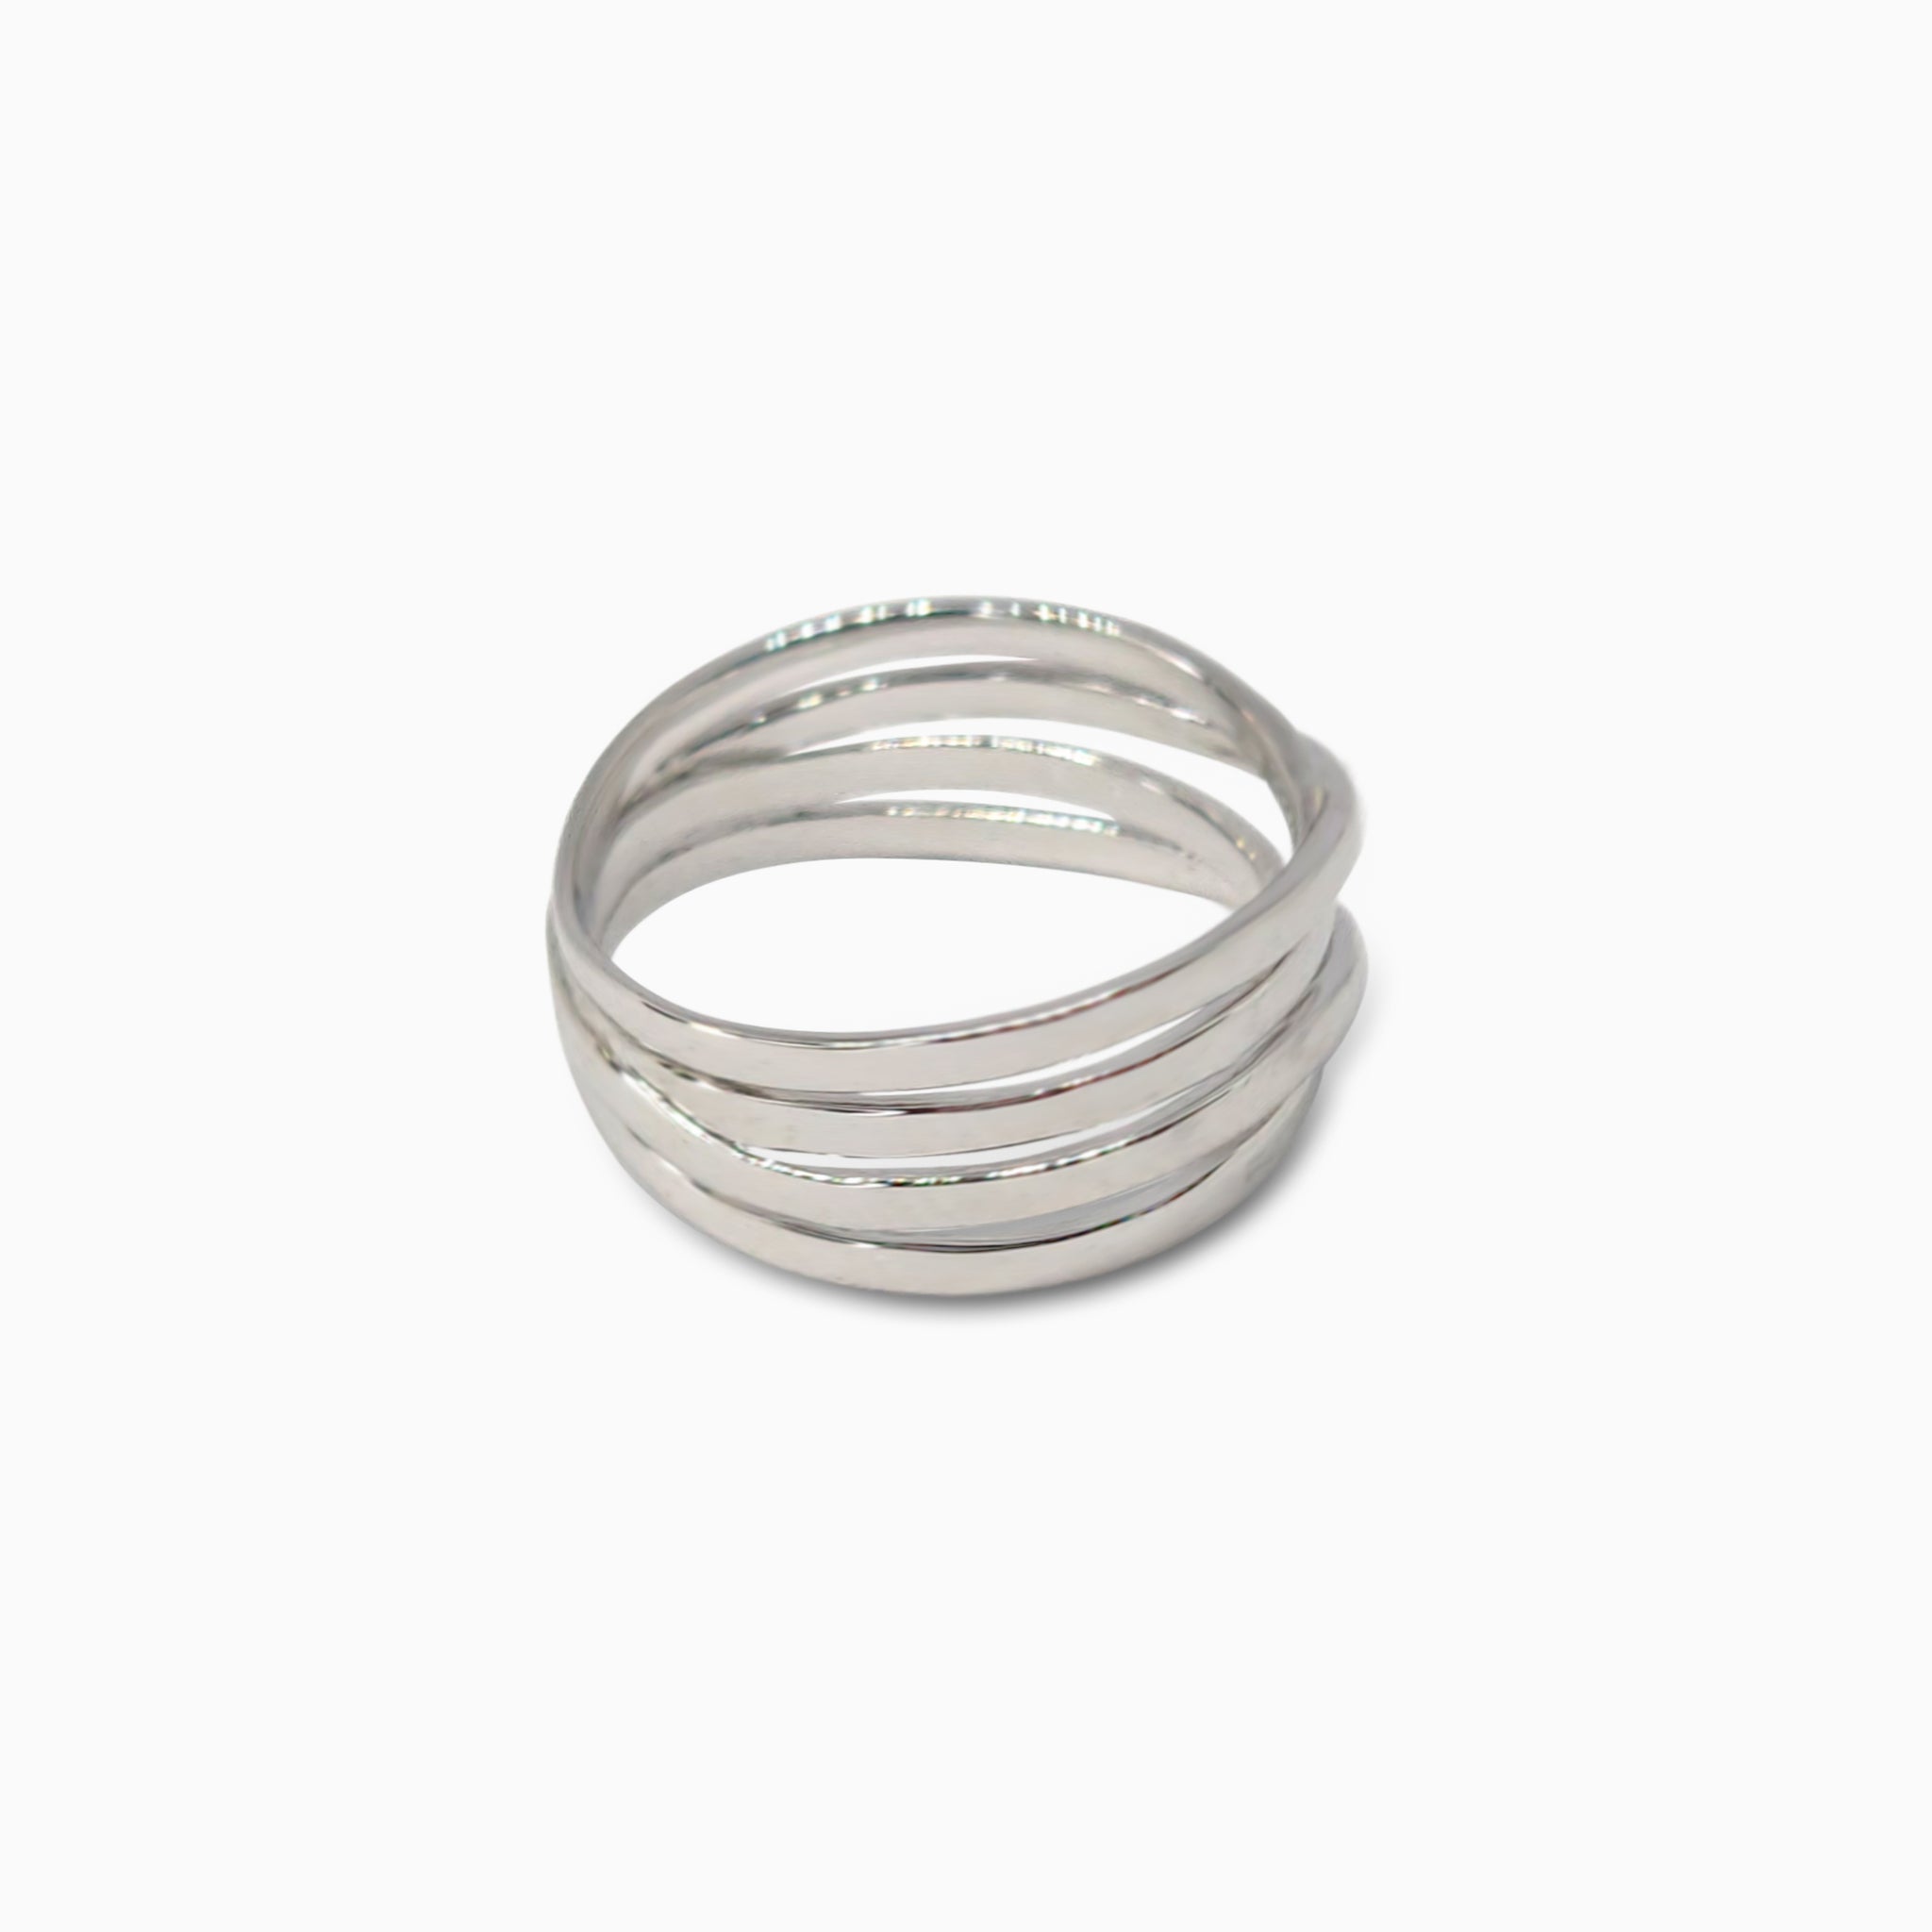 Silver 4 Line Unisex Ring